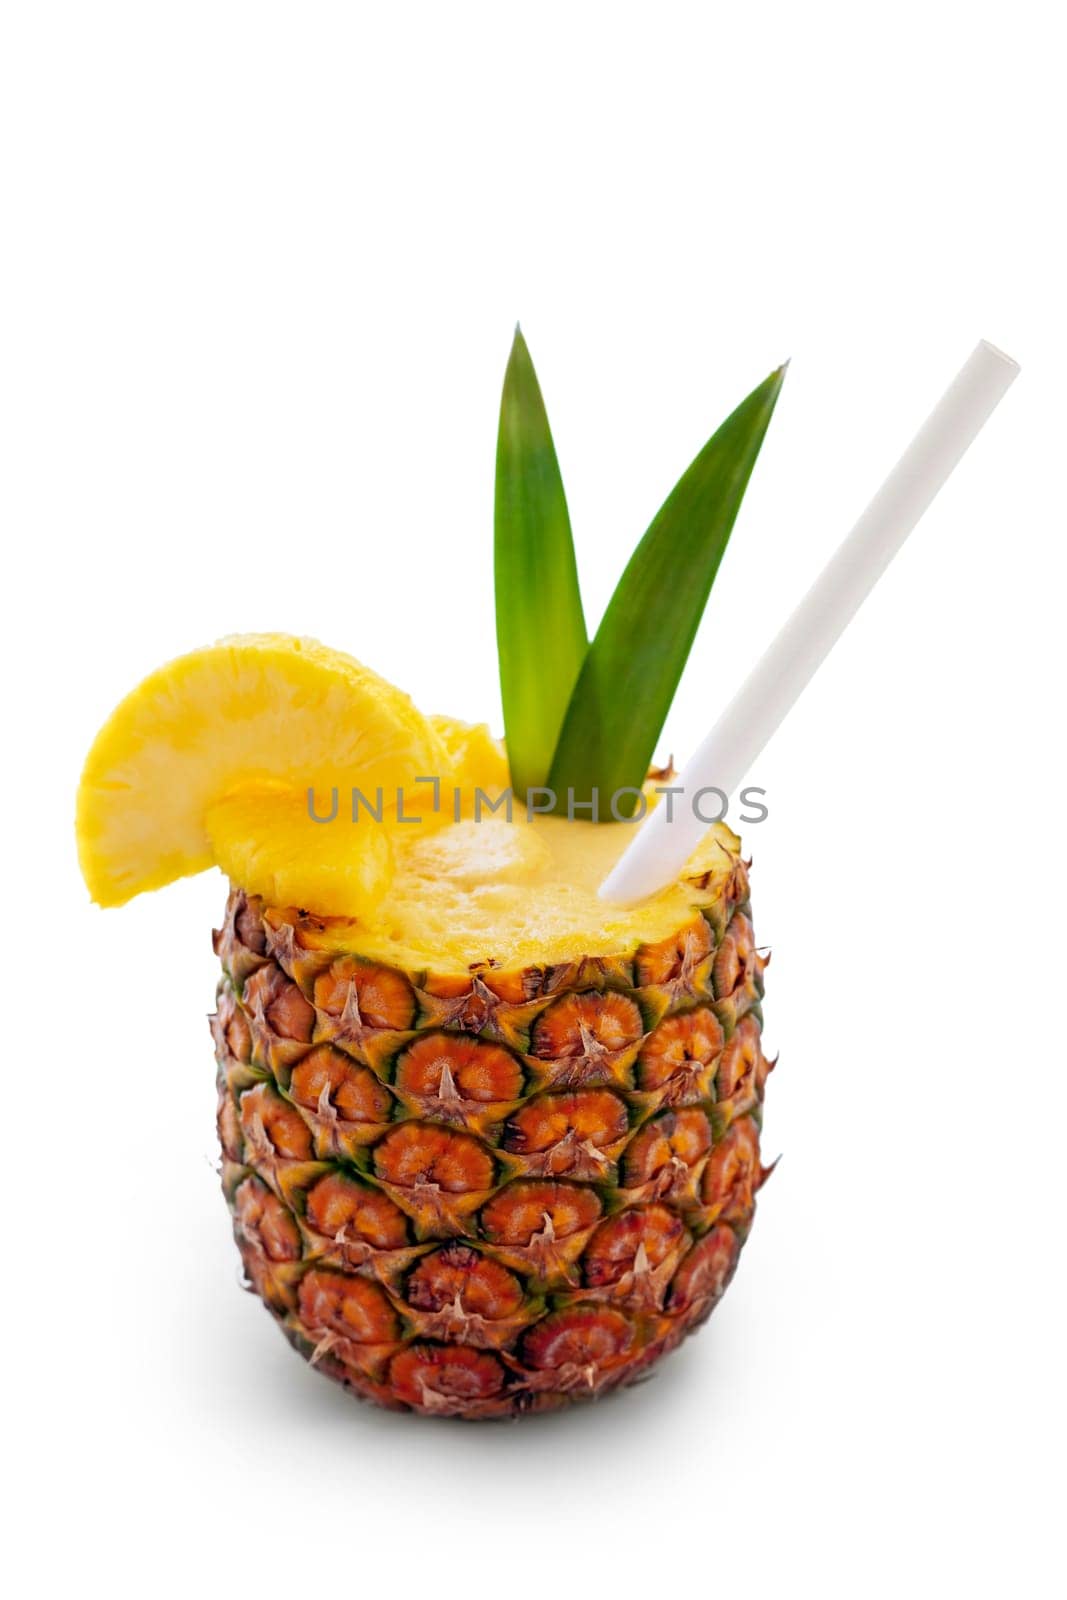 Pineapple Pina Colada Cocktail On White by gcm